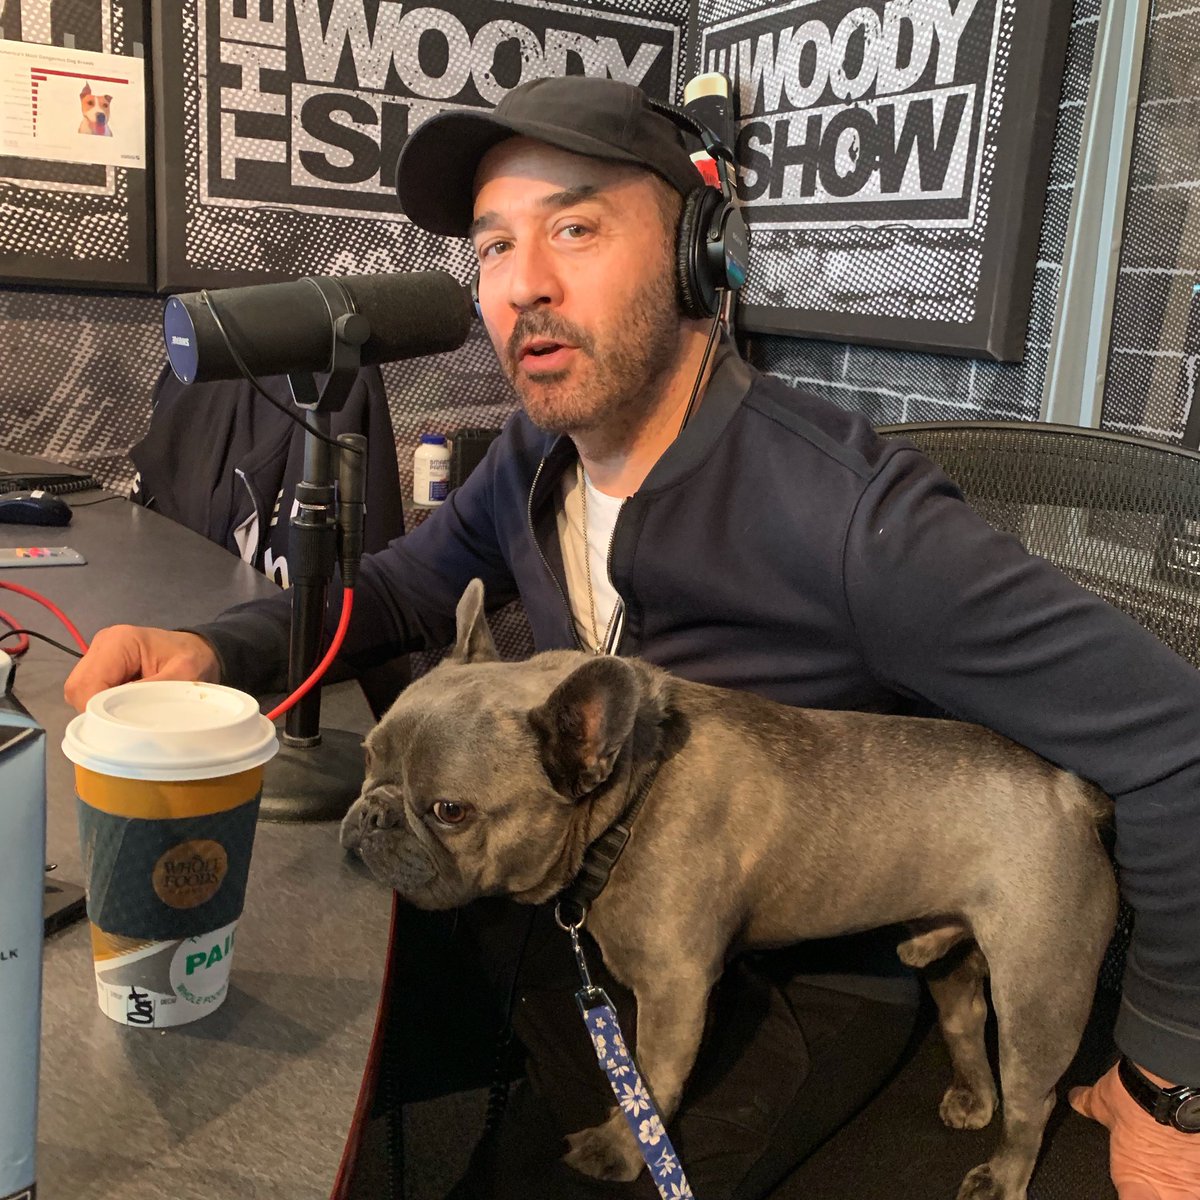 RT @TheWoodyShow: Thank you @jeremypiven for being on The Woody Show! Check him out this weekend @sanjoseimprov!! https://t.co/X3FZow7hlf